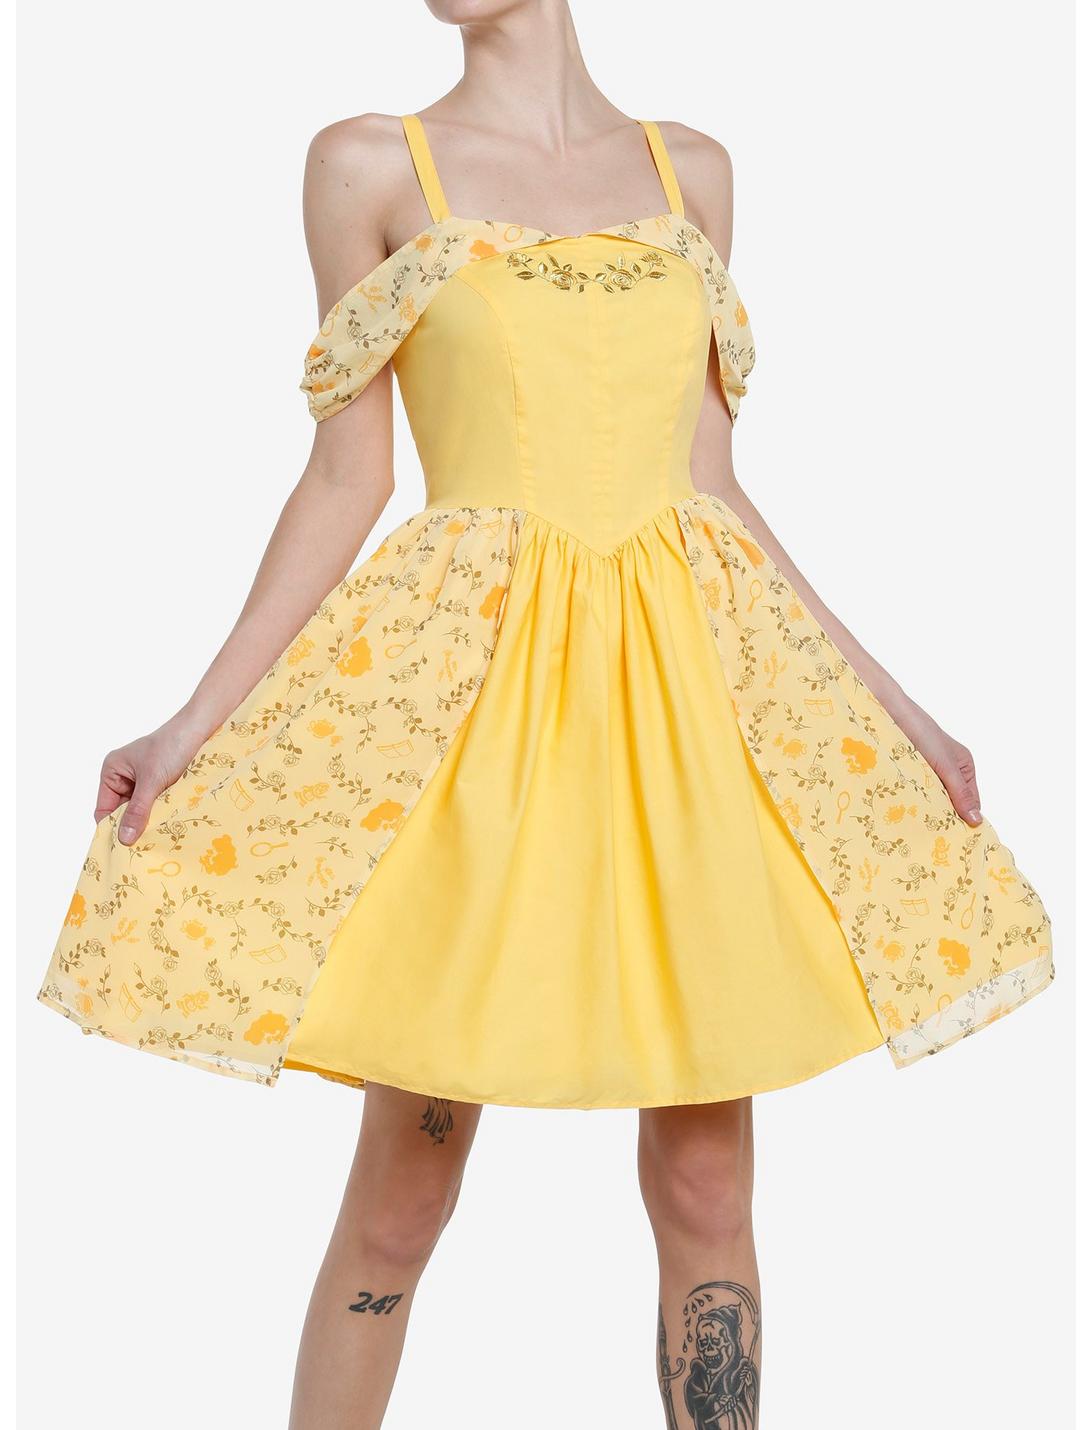 Her Universe Disney Beauty And The Beast Belle Cold Shoulder Dress, BANANA YELLOW, hi-res